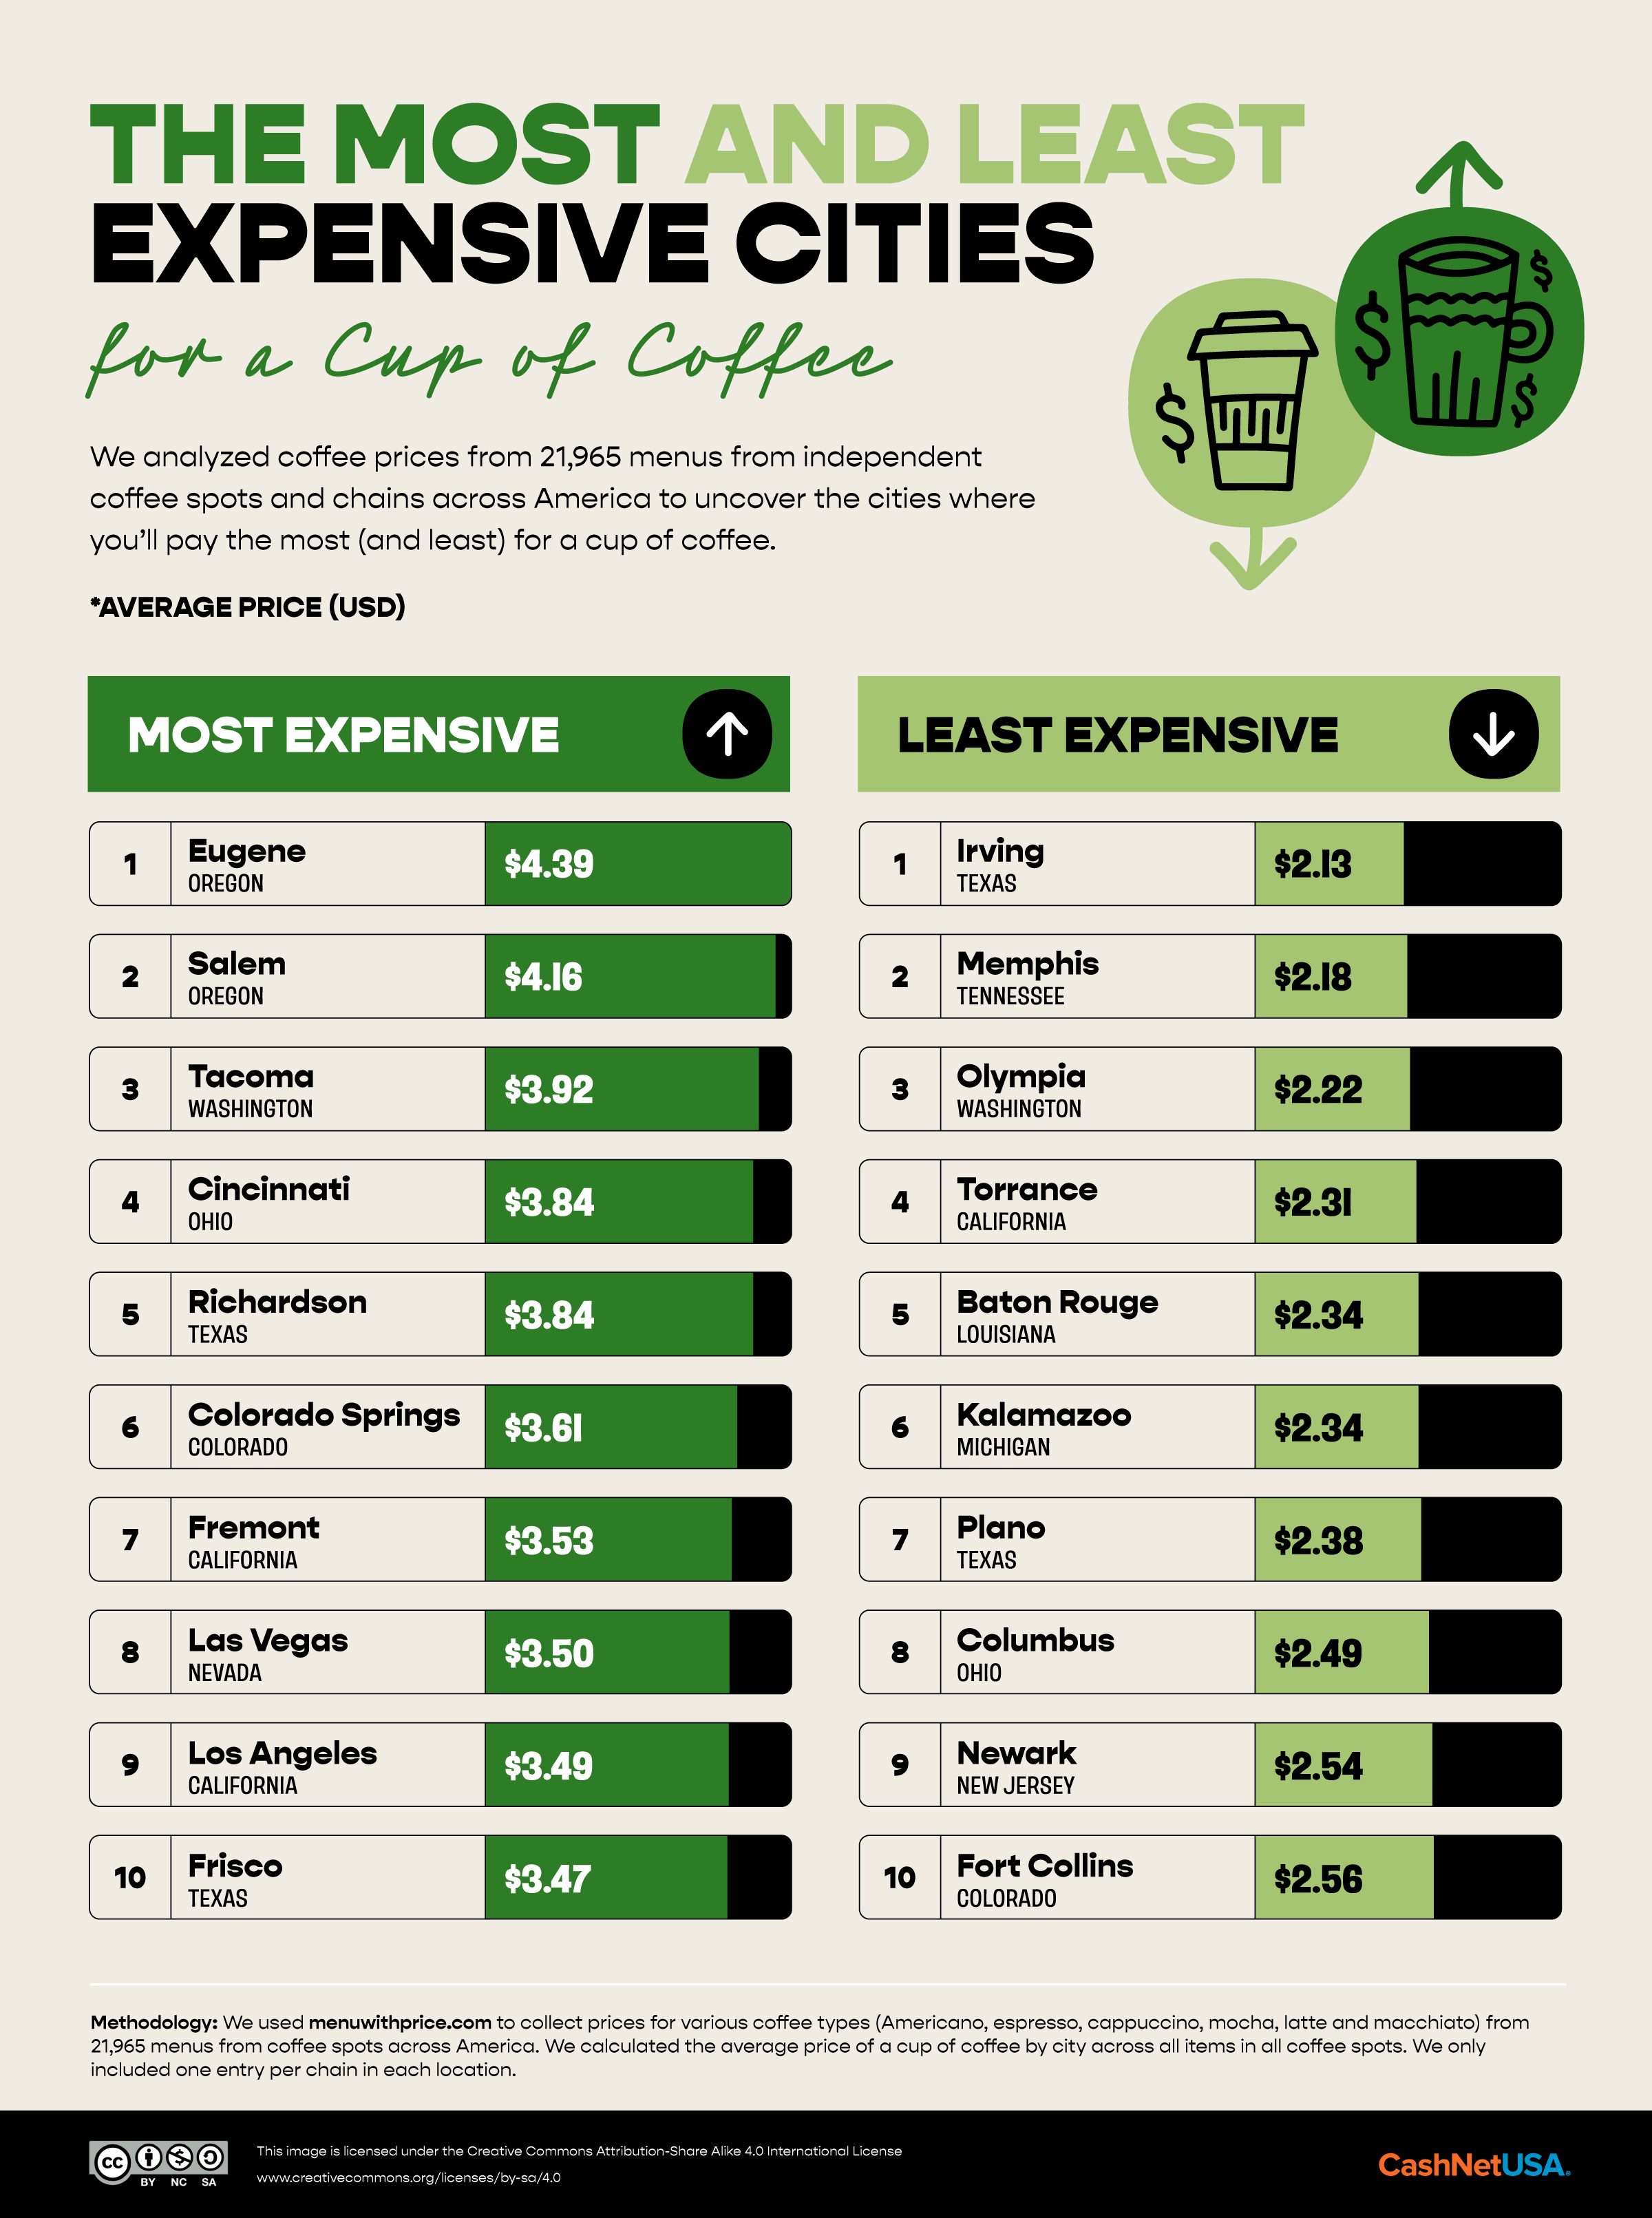 List showing the most and least expensive U.S. cities for coffee